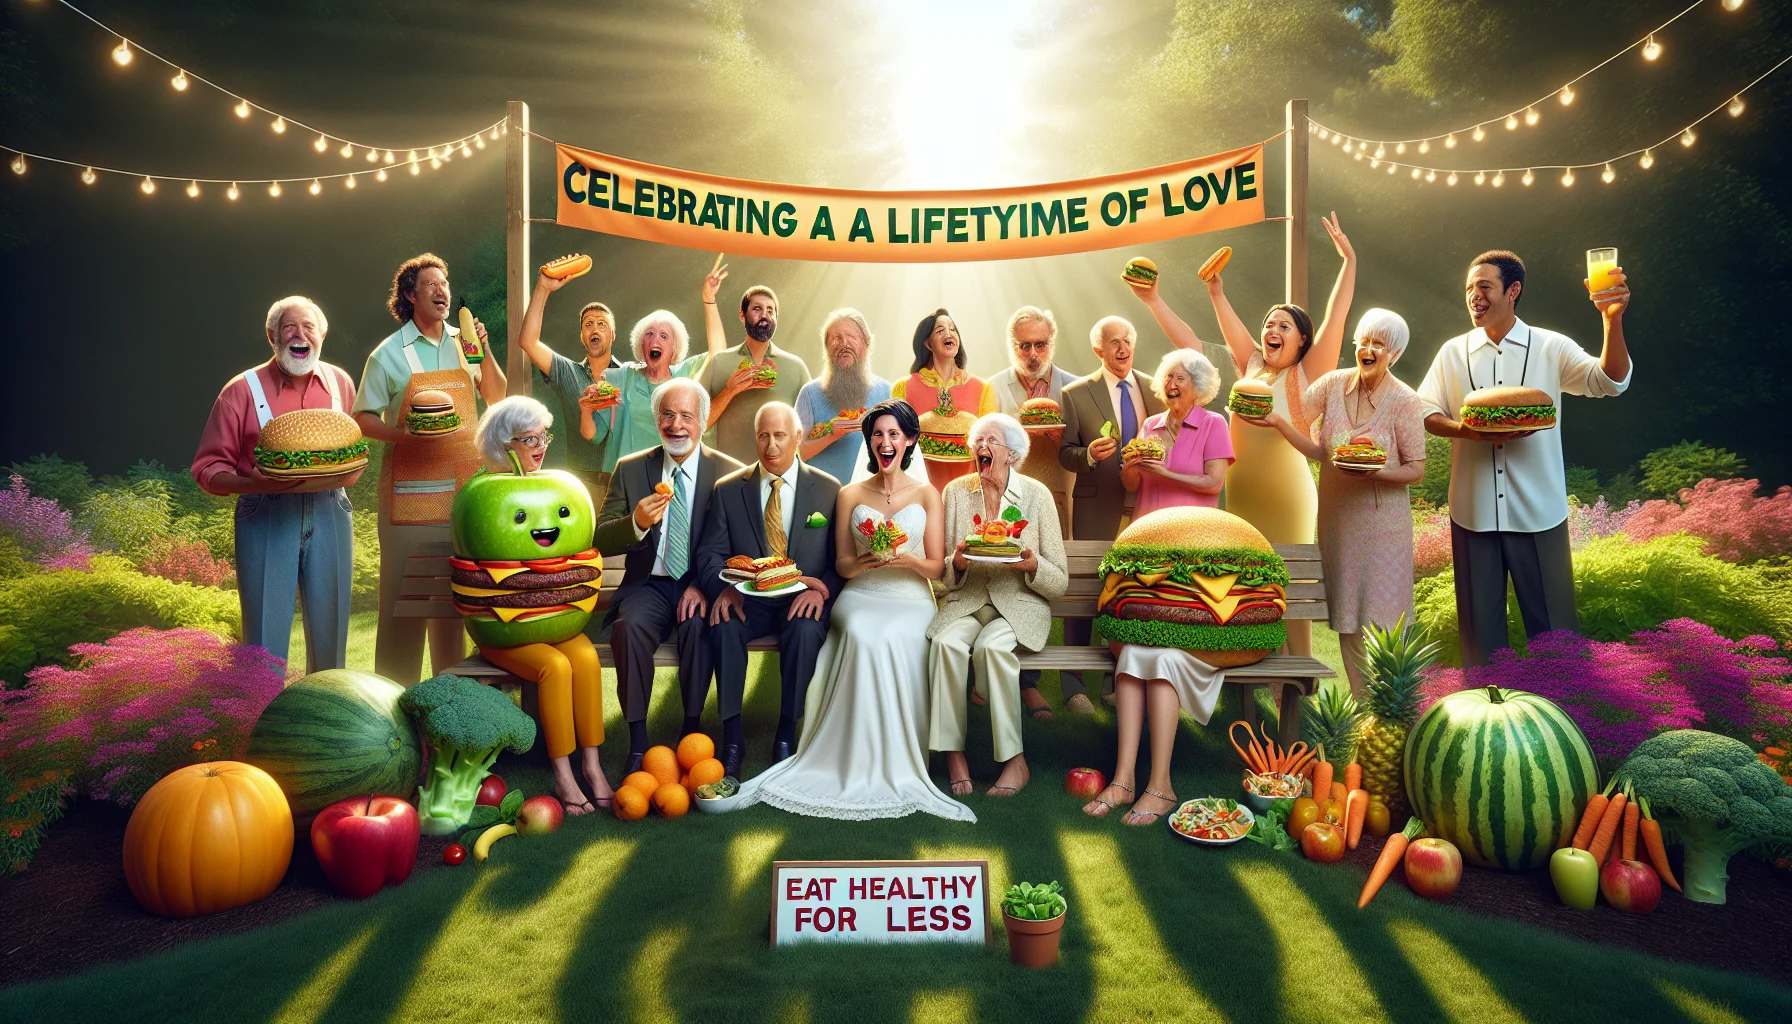 Create a hyperrealistic image of a diverse group of individuals, different in descent and gender. They are all gathered in a radiant, sunlit garden. A large banner is hung across the scene, reading 'Celebrating a Lifetime of Love'. In a humorous twist, vegetables and fruits are masquerading as fast food - an apple burger, a carrot hot dog, a lettuce taco and a melon pizza. The people are visibly amused, pointing and laughing, trying out these quirky, healthy alternatives. A sign is present that reads: 'Eat Healthy for Less', promising inexpensive, nutritious options for everyone.